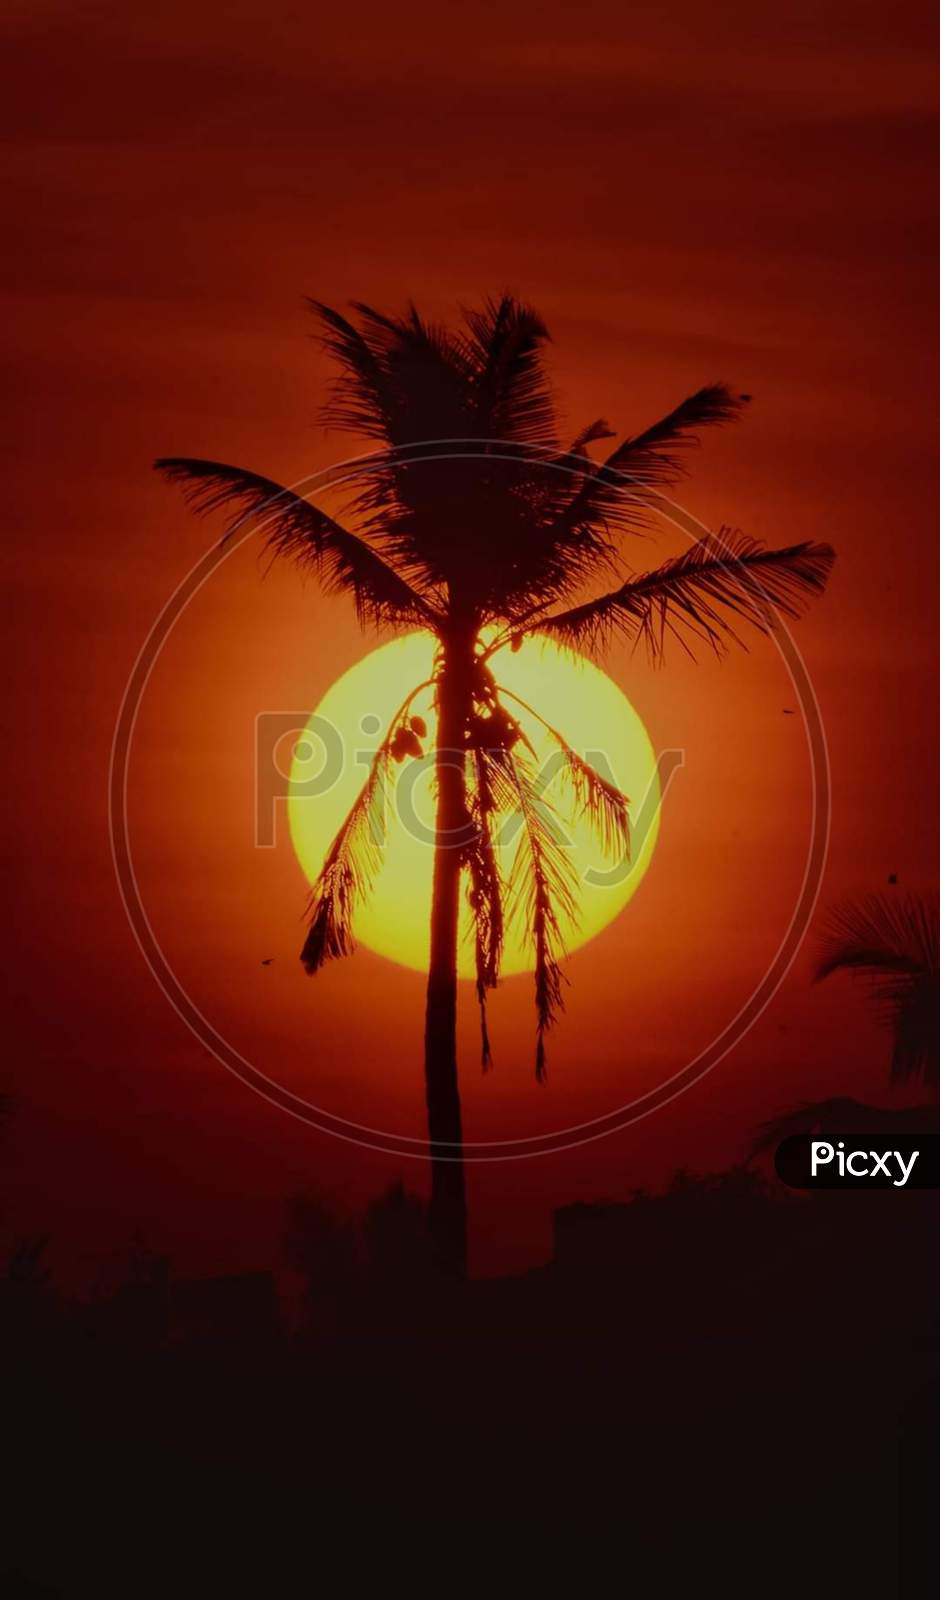 A beautiful sunset and a coconut tree